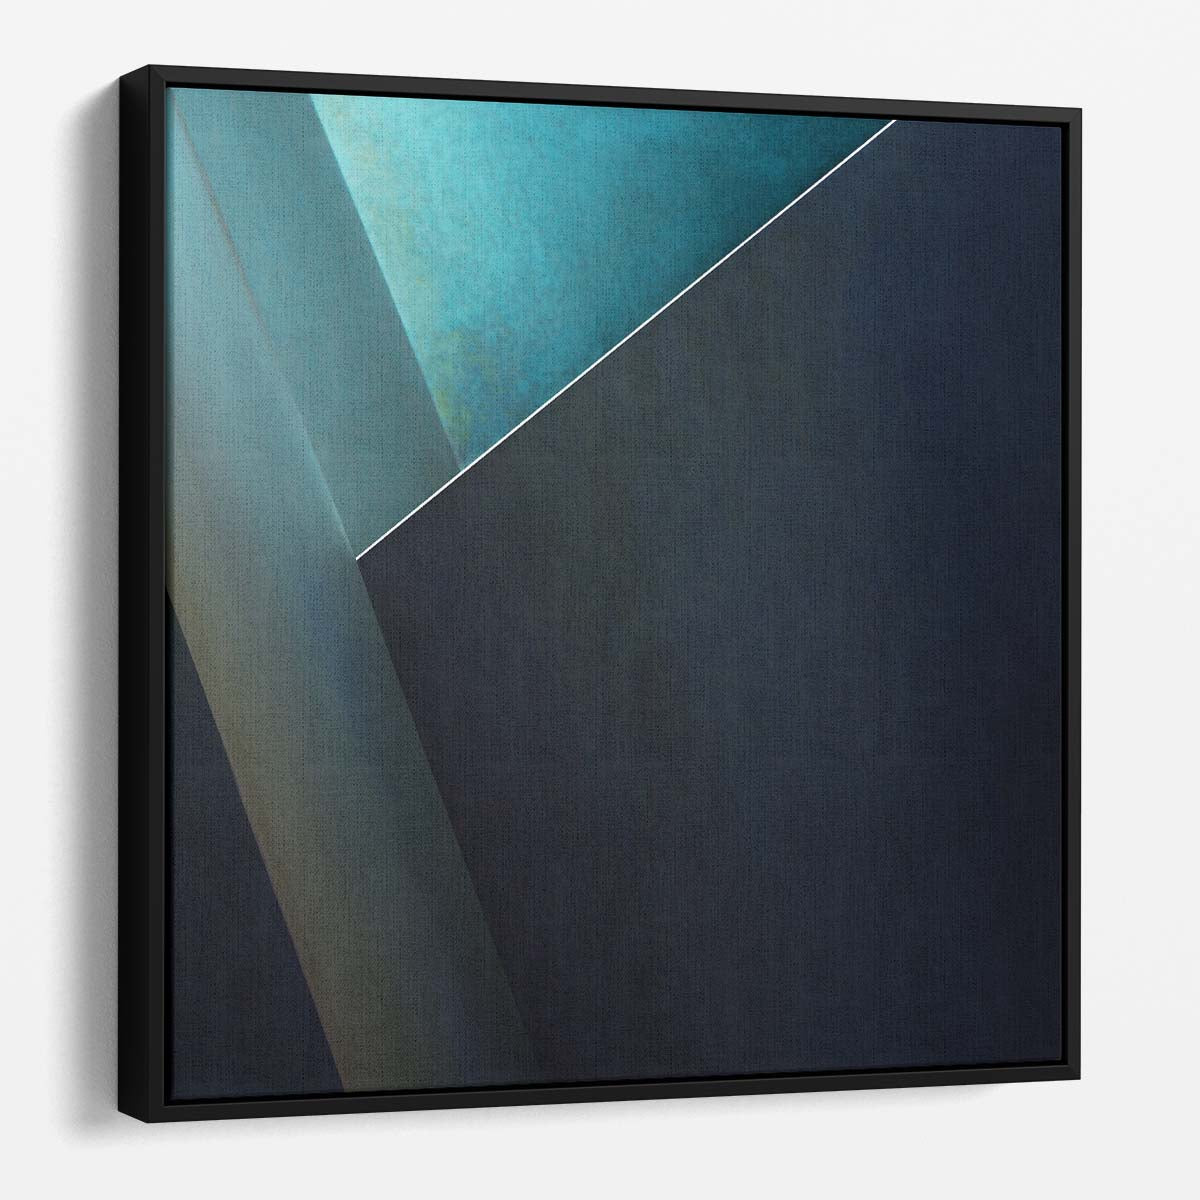 Abstract Teal Geometric Lines Minimalist Photography Wall Art by Luxuriance Designs. Made in USA.